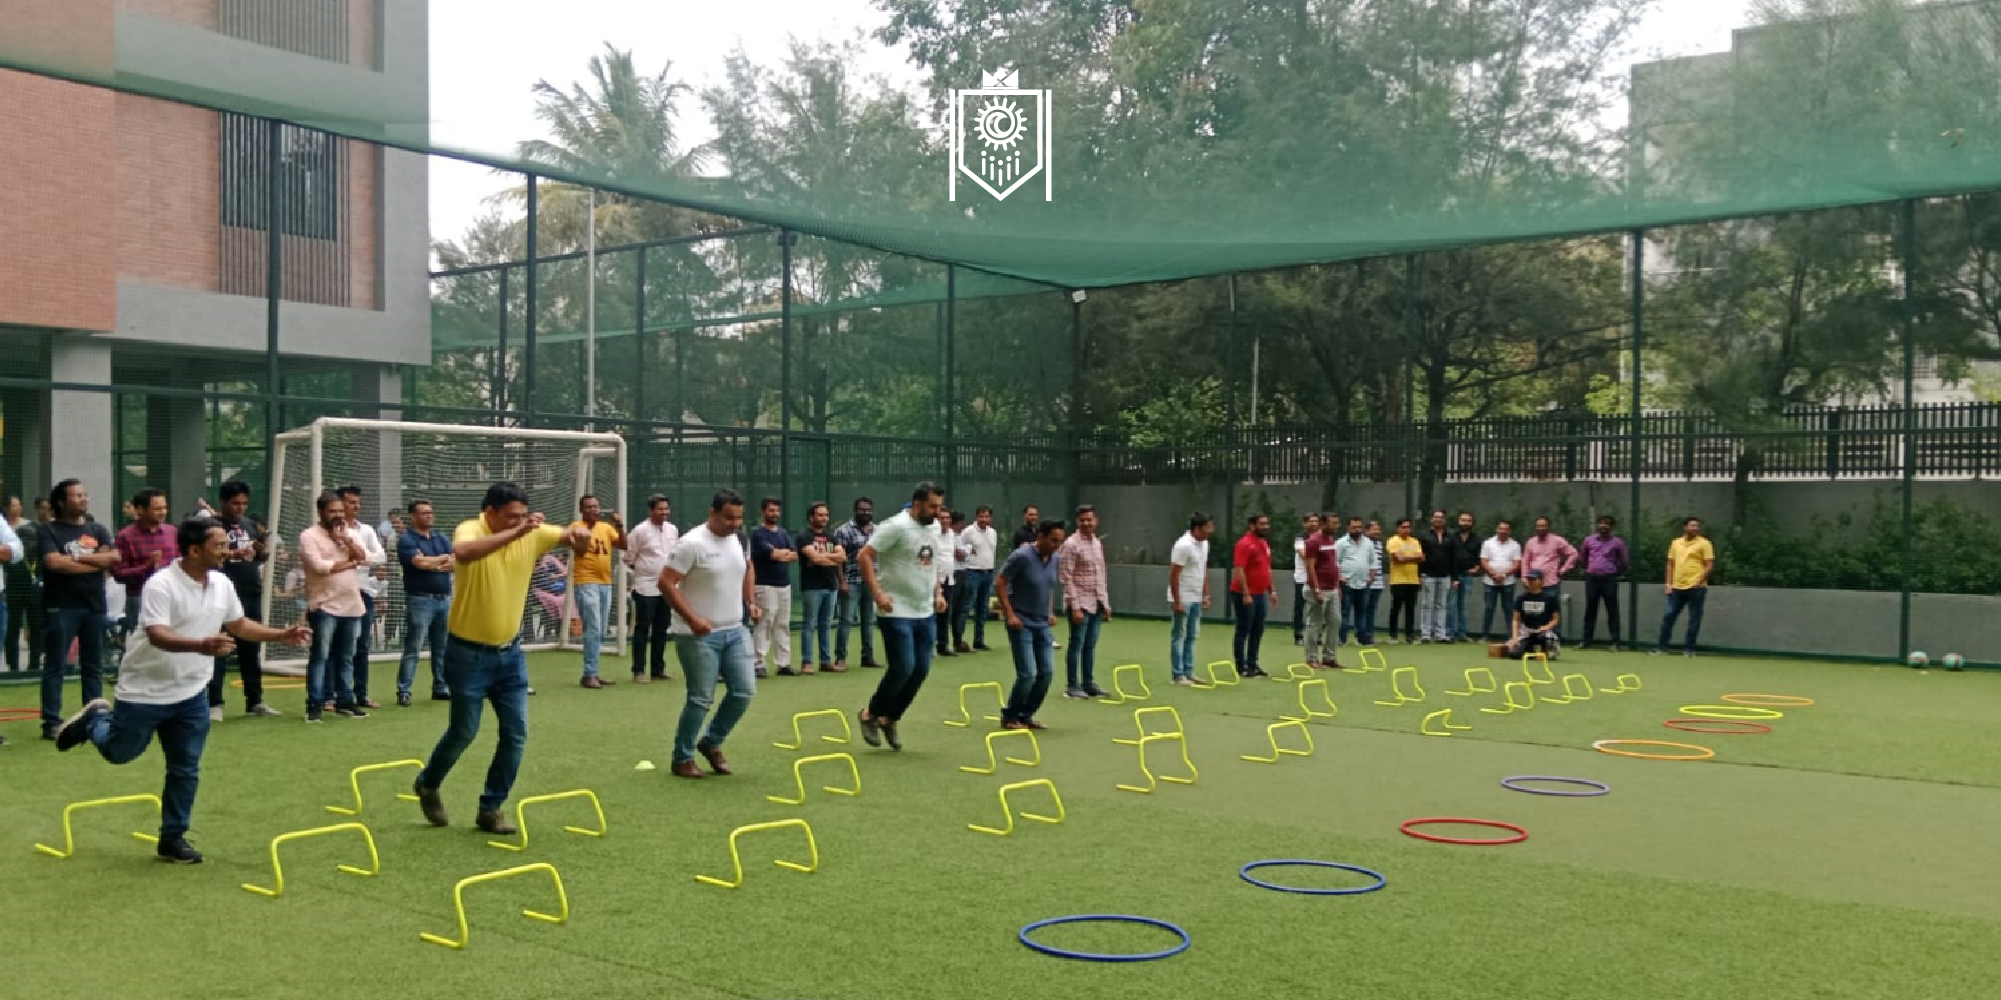 Times of India Spotlights Helios Schools’ Heartwarming Father’s Day Celebration